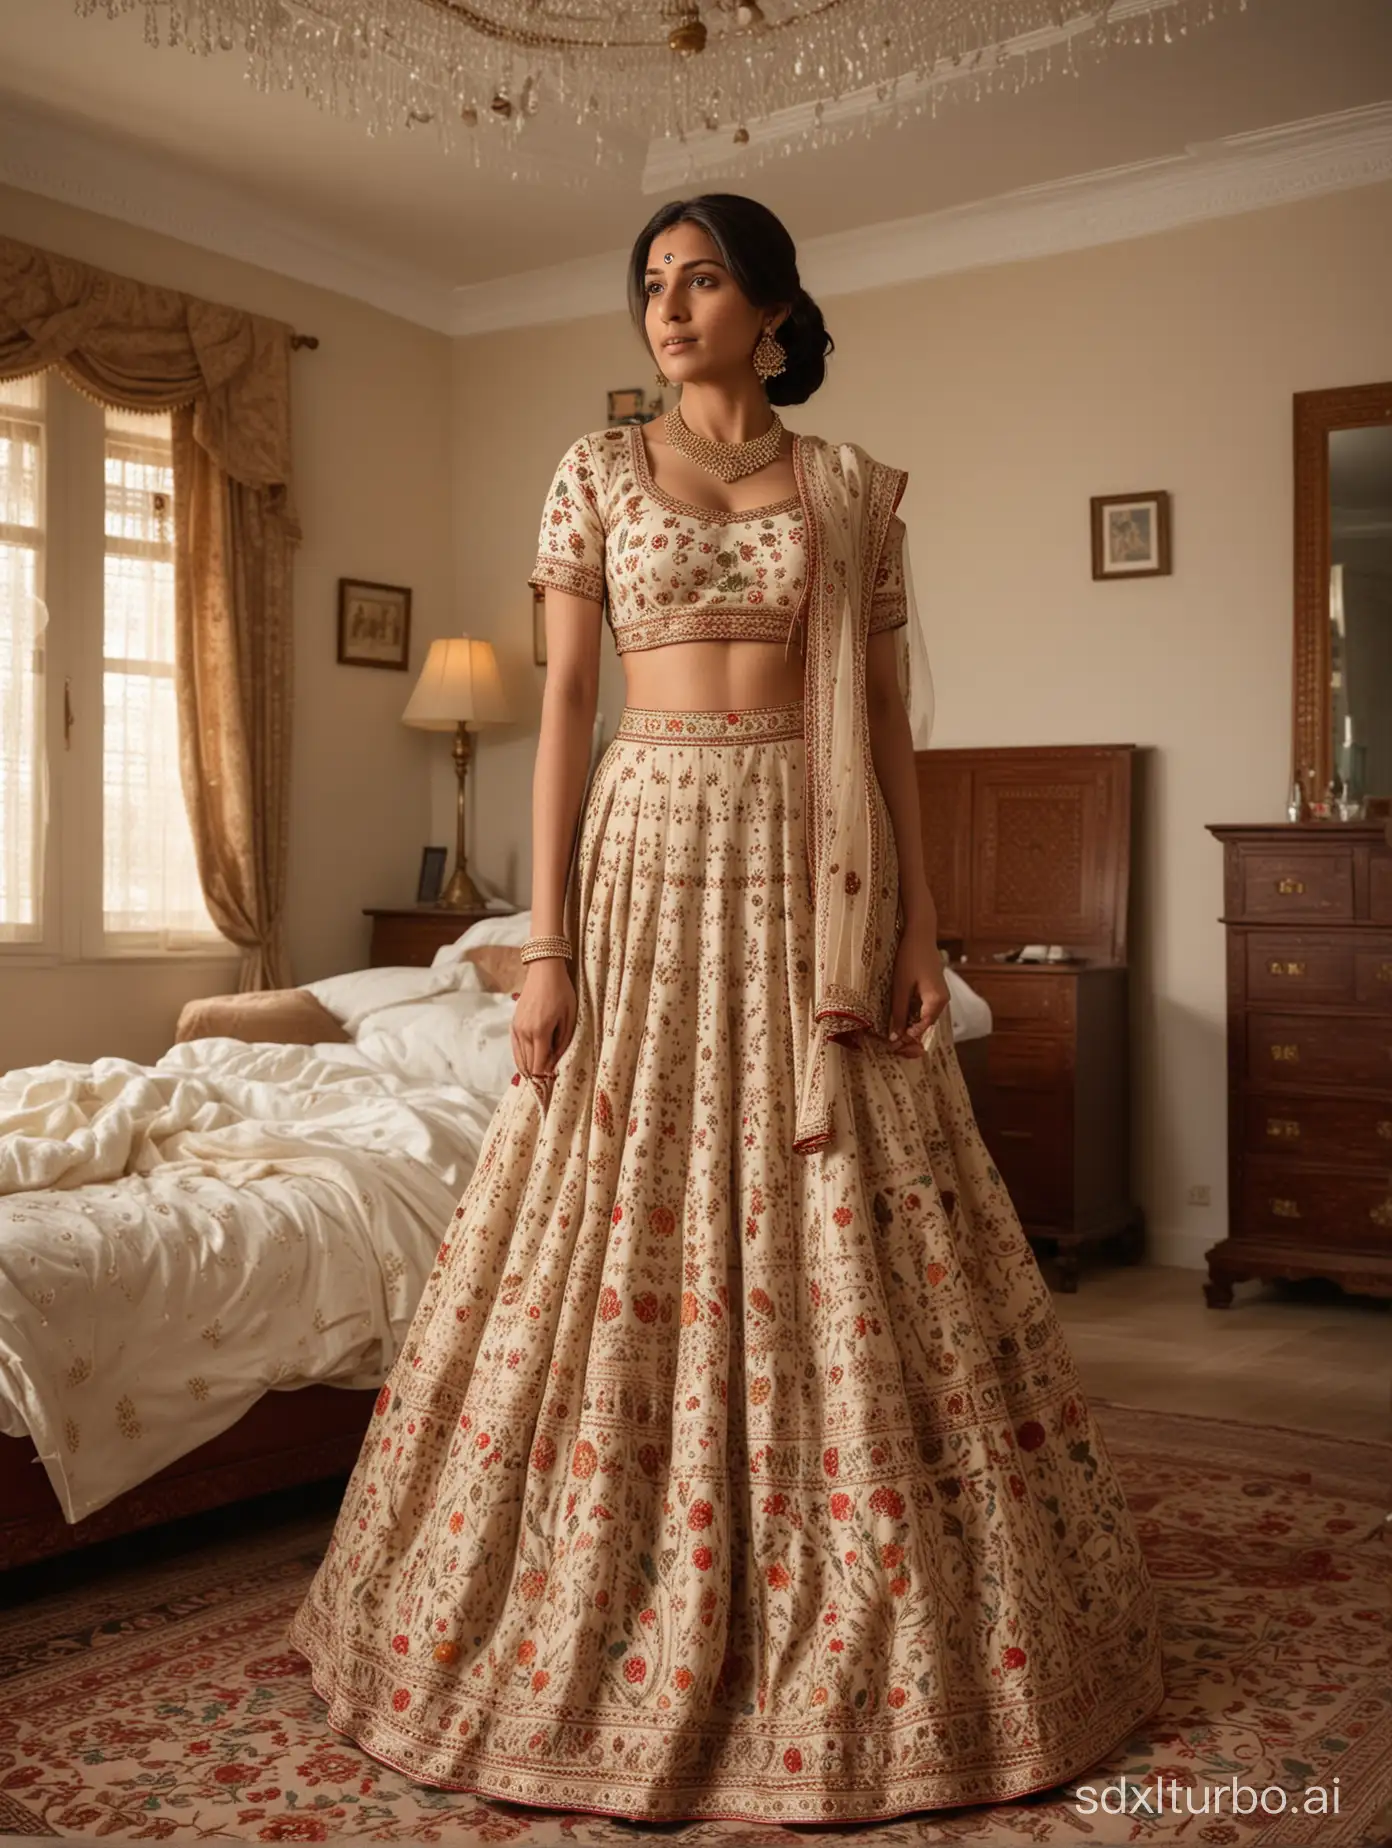 Indian-Woman-in-Traditional-Lehenga-with-Pichwai-and-Embroidery-in-Brightly-Lit-Bedroom